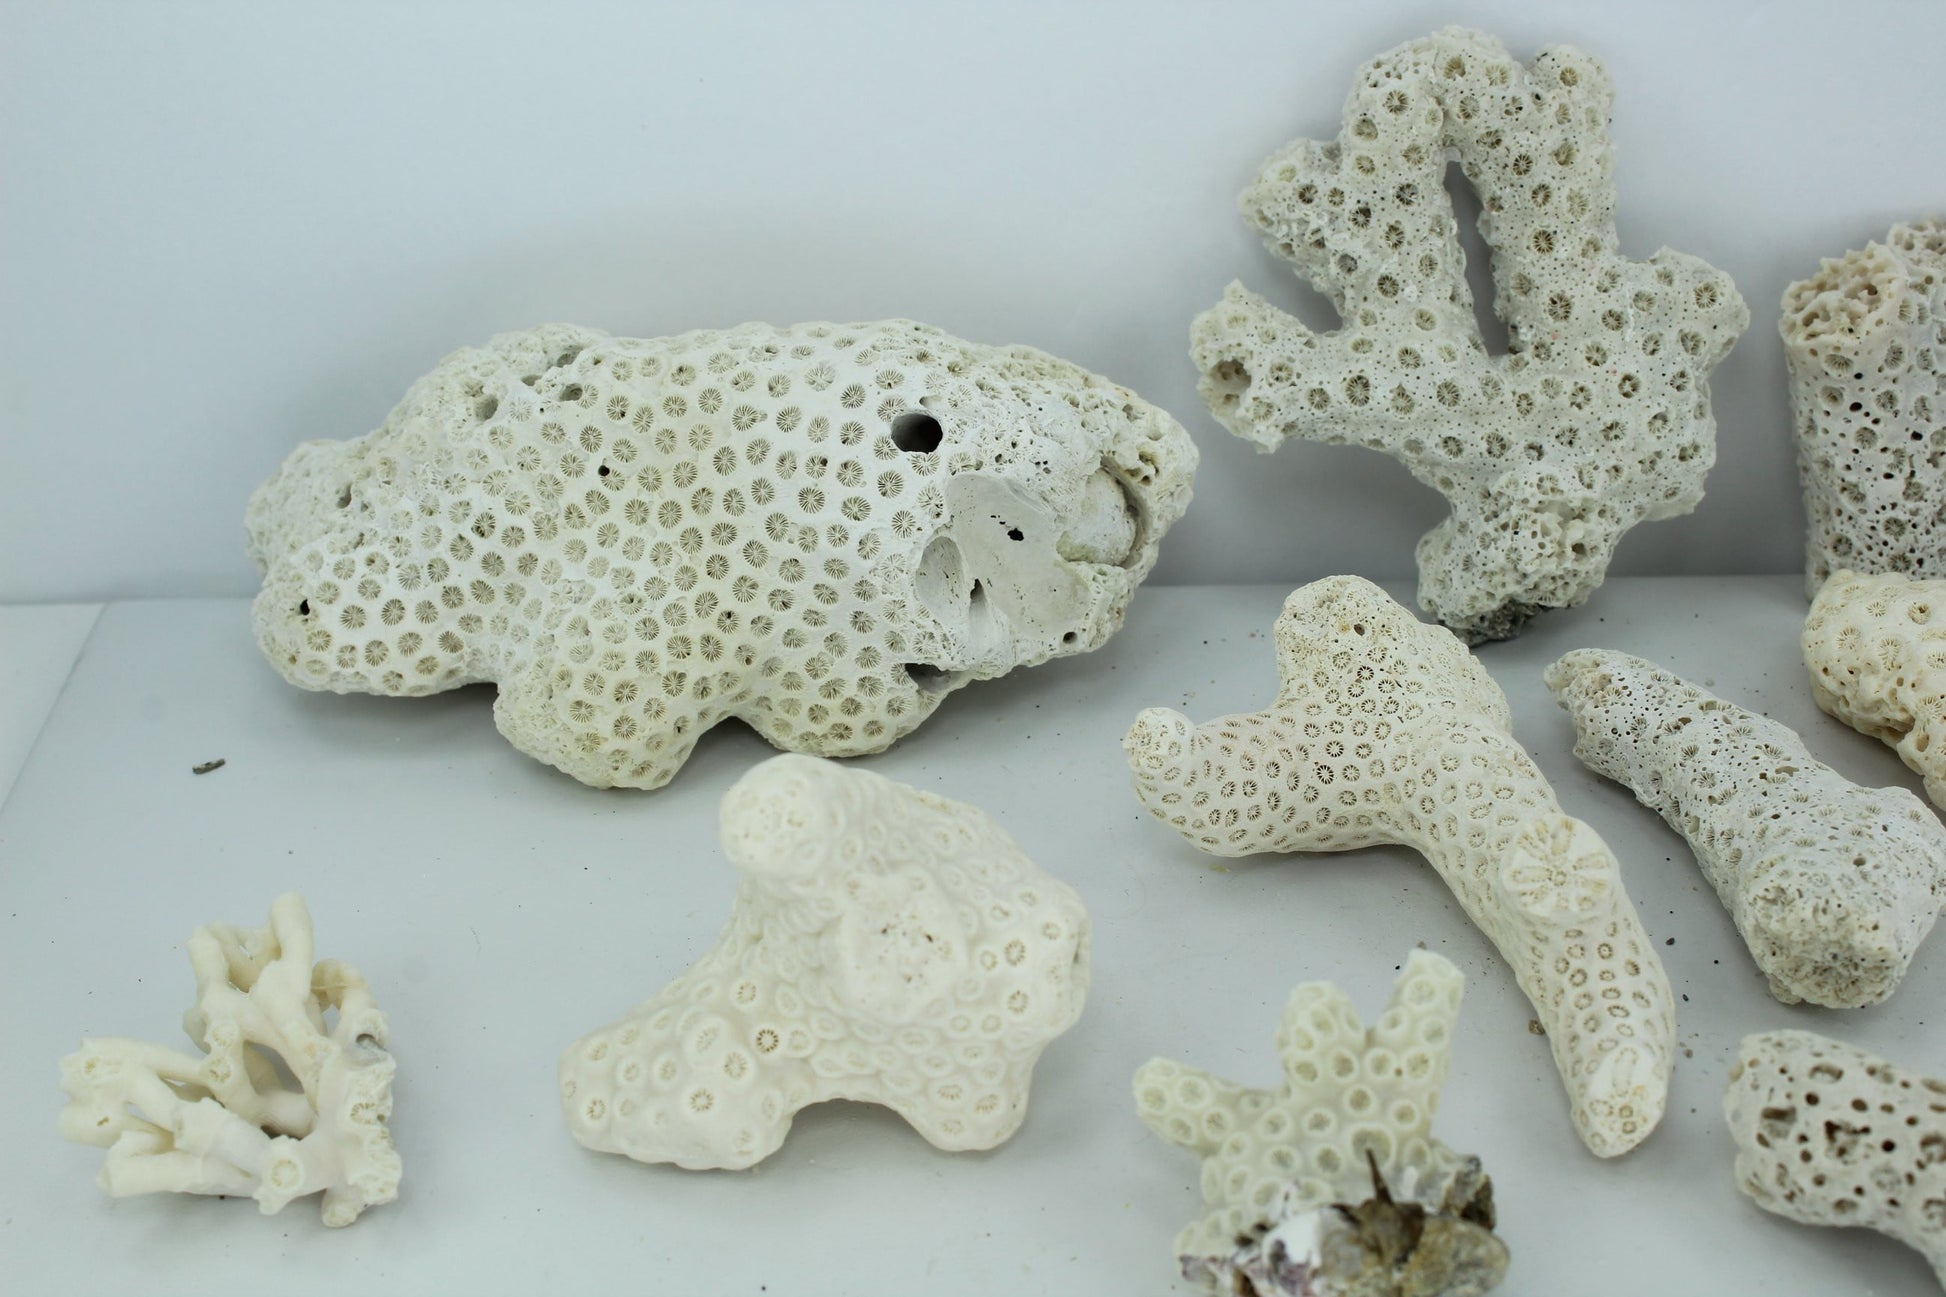 Natural Coral Fossils 11 Small Pieces 5" to 1 1/2" Estate Collection Aquarium Shell Art Collectibles old